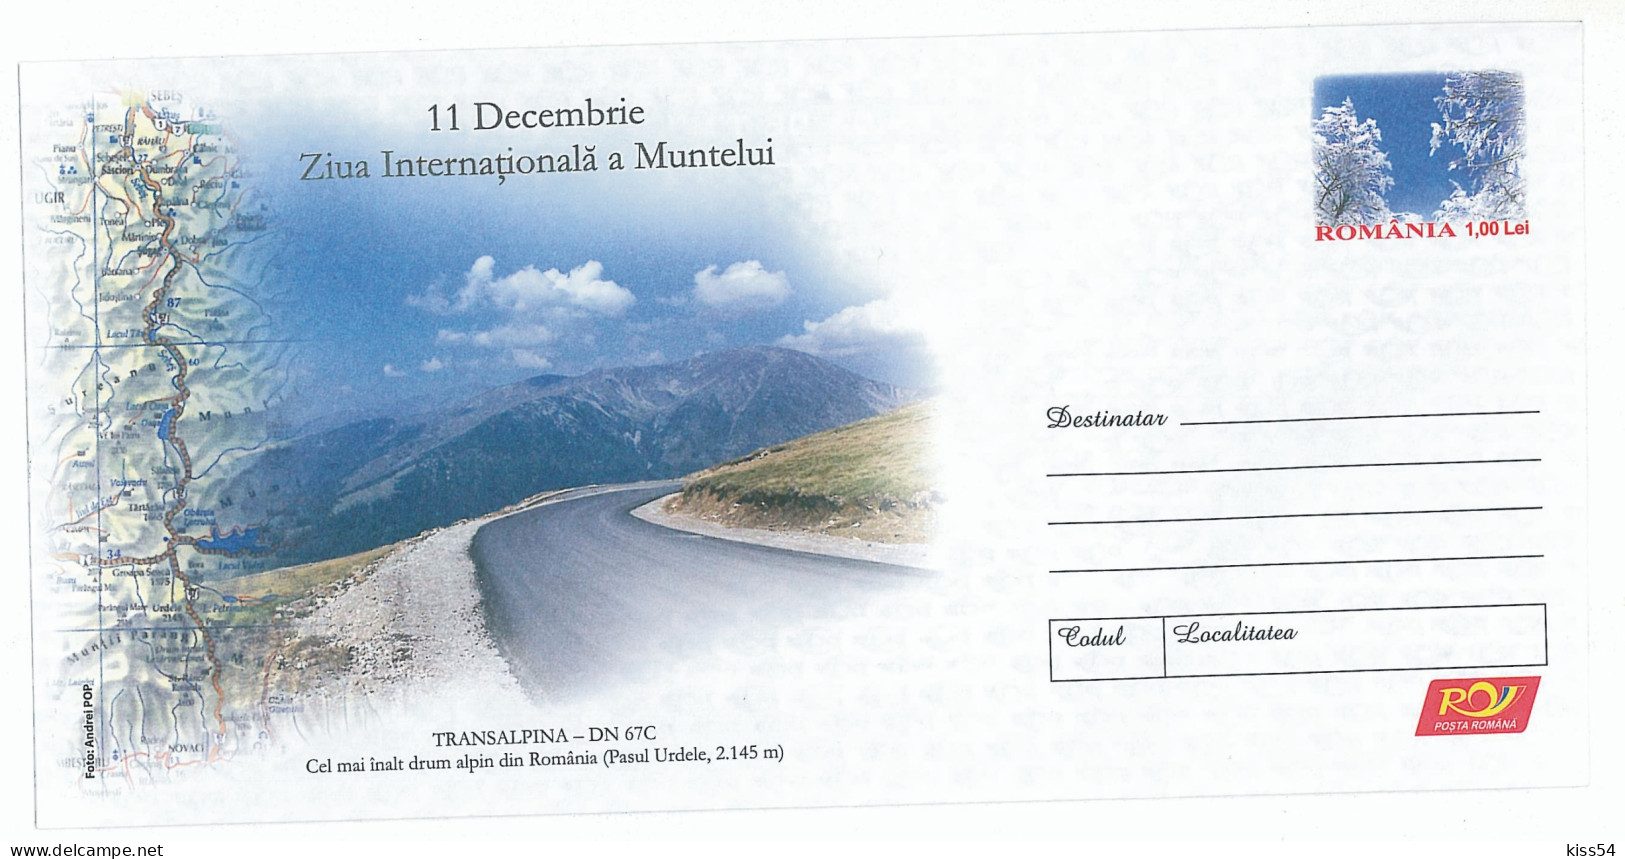 IP 2009 - 52 International Day Of The Mountain, MAP, Romania - Stationery - Unused - 2009 - Postal Stationery